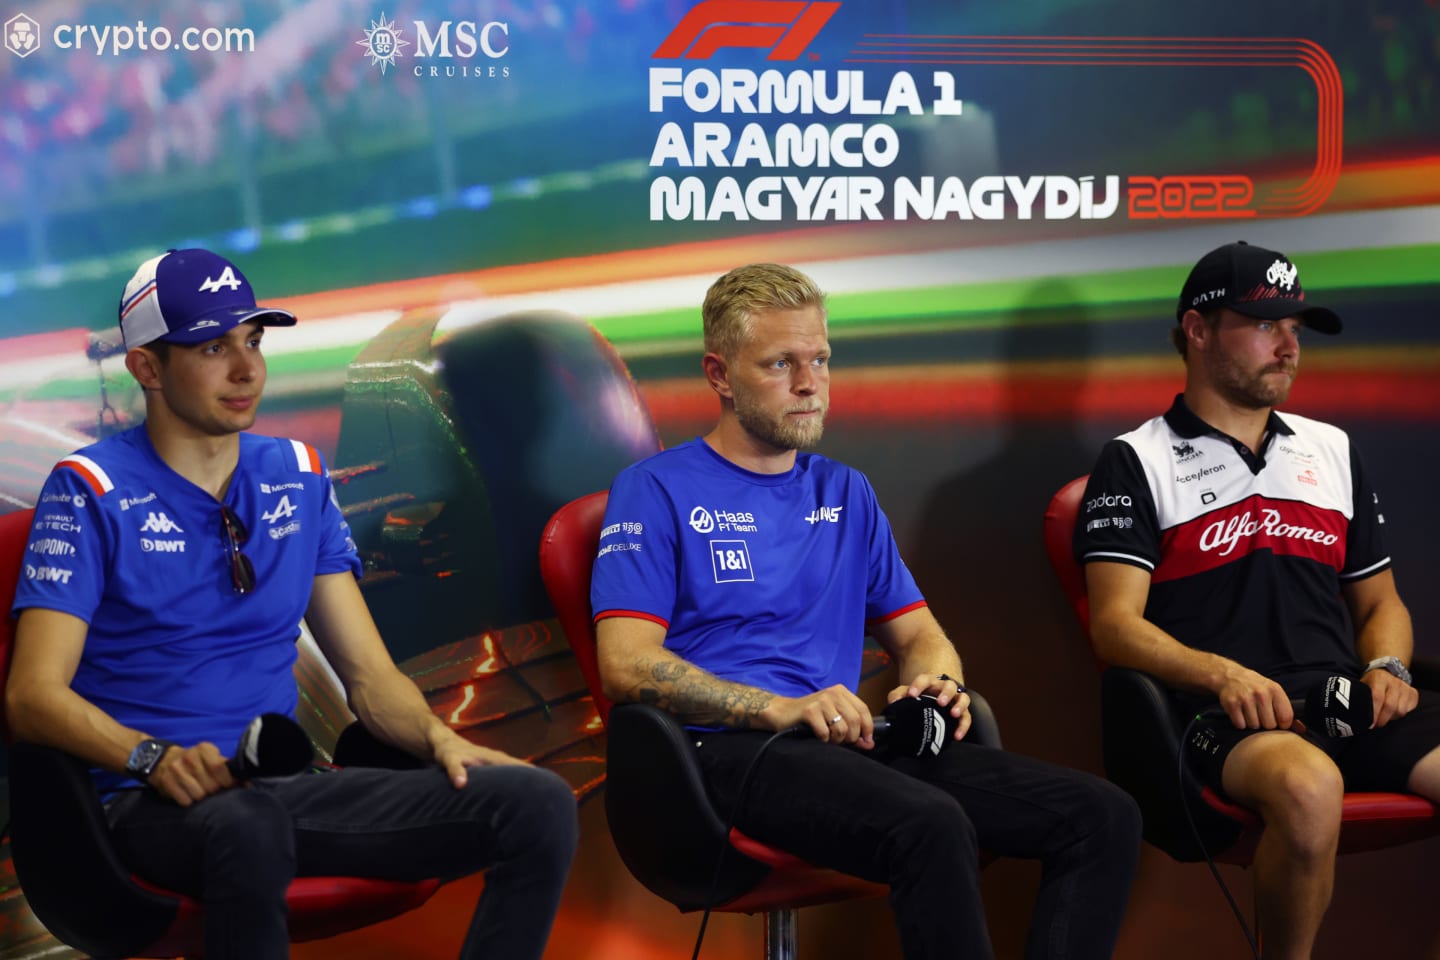 BUDAPEST, HUNGARY - JULY 28: Esteban Ocon of France and Alpine F1, Kevin Magnussen of Denmark and Haas F1 and Valtteri Bottas of Finland and Alfa Romeo F1 look on in the Drivers Press Conference during previews ahead of the F1 Grand Prix of Hungary at Hungaroring on July 28, 2022 in Budapest, Hungary. (Photo by Bryn Lennon/Getty Images)